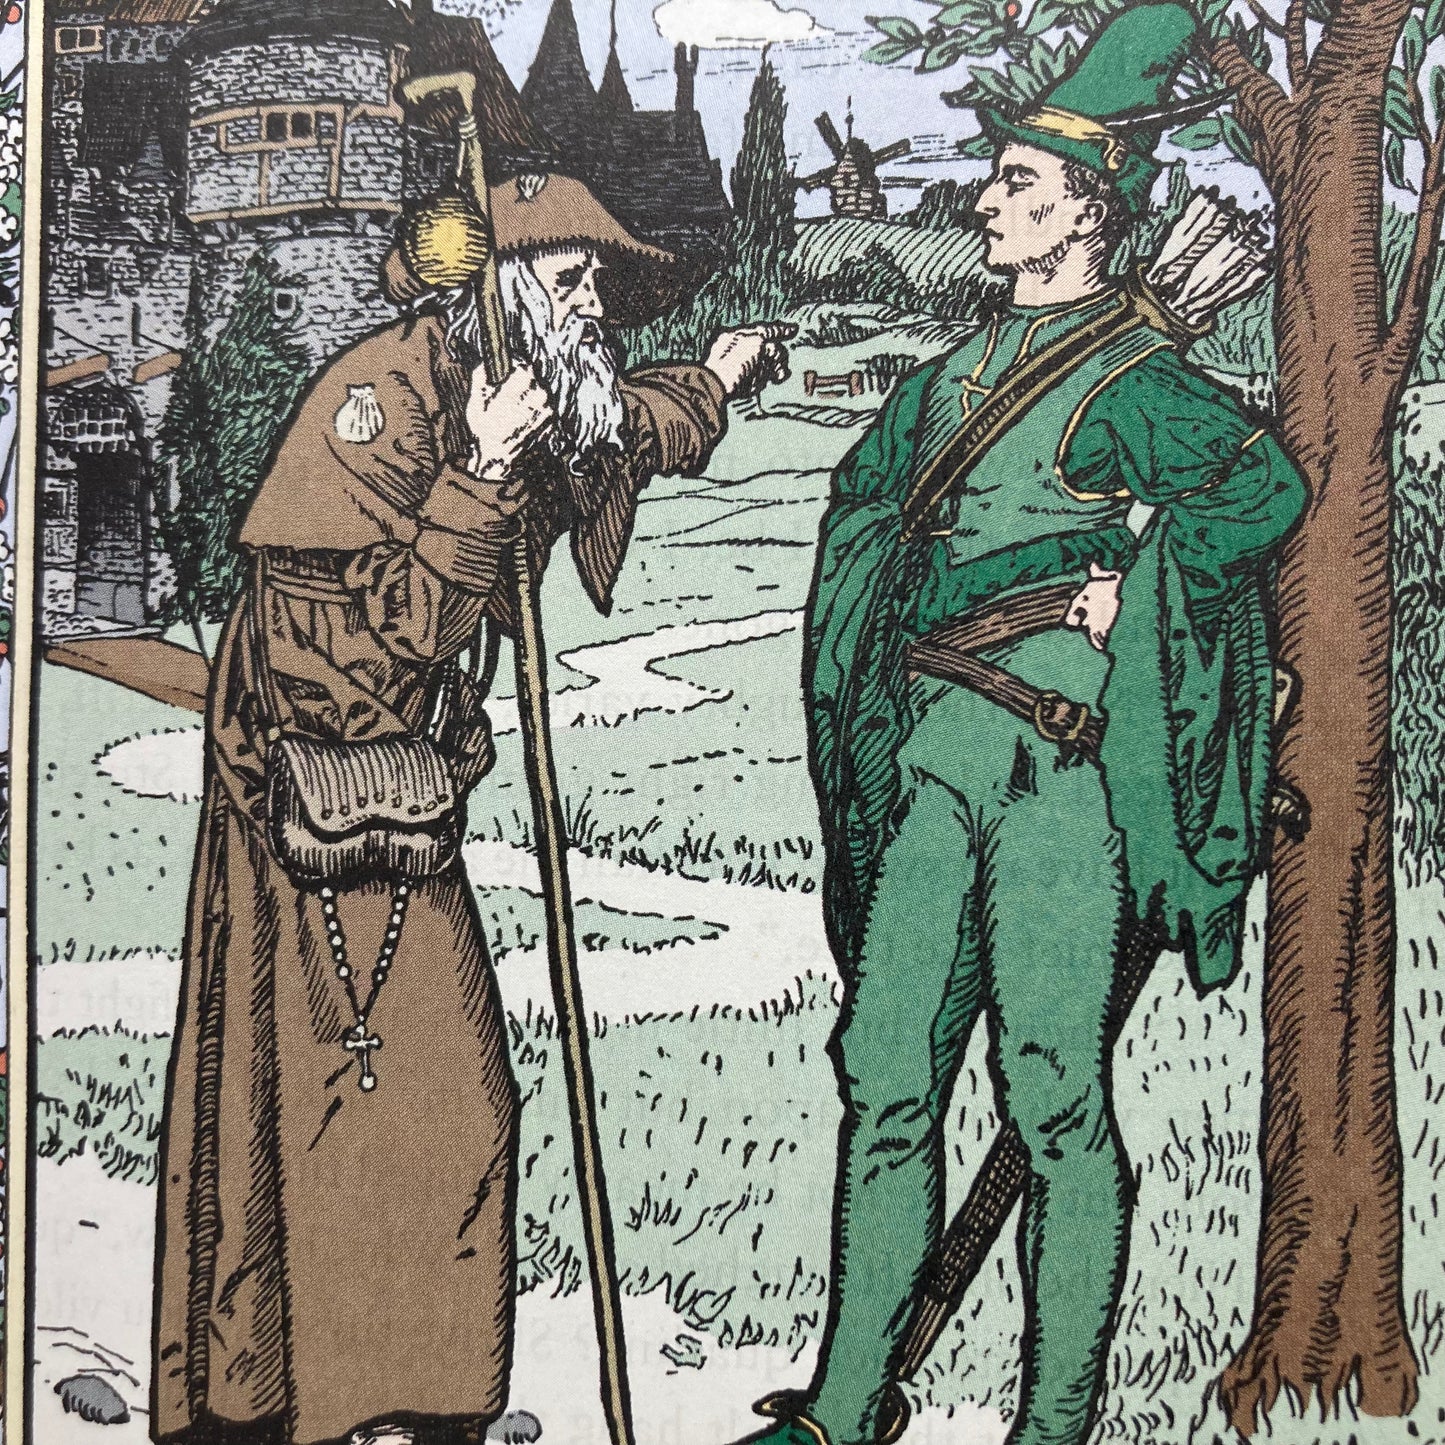 PYLE, Howard “The Merry Adventures of Robin Hood” [Barnes & Noble, 2016] - Buzz Bookstore